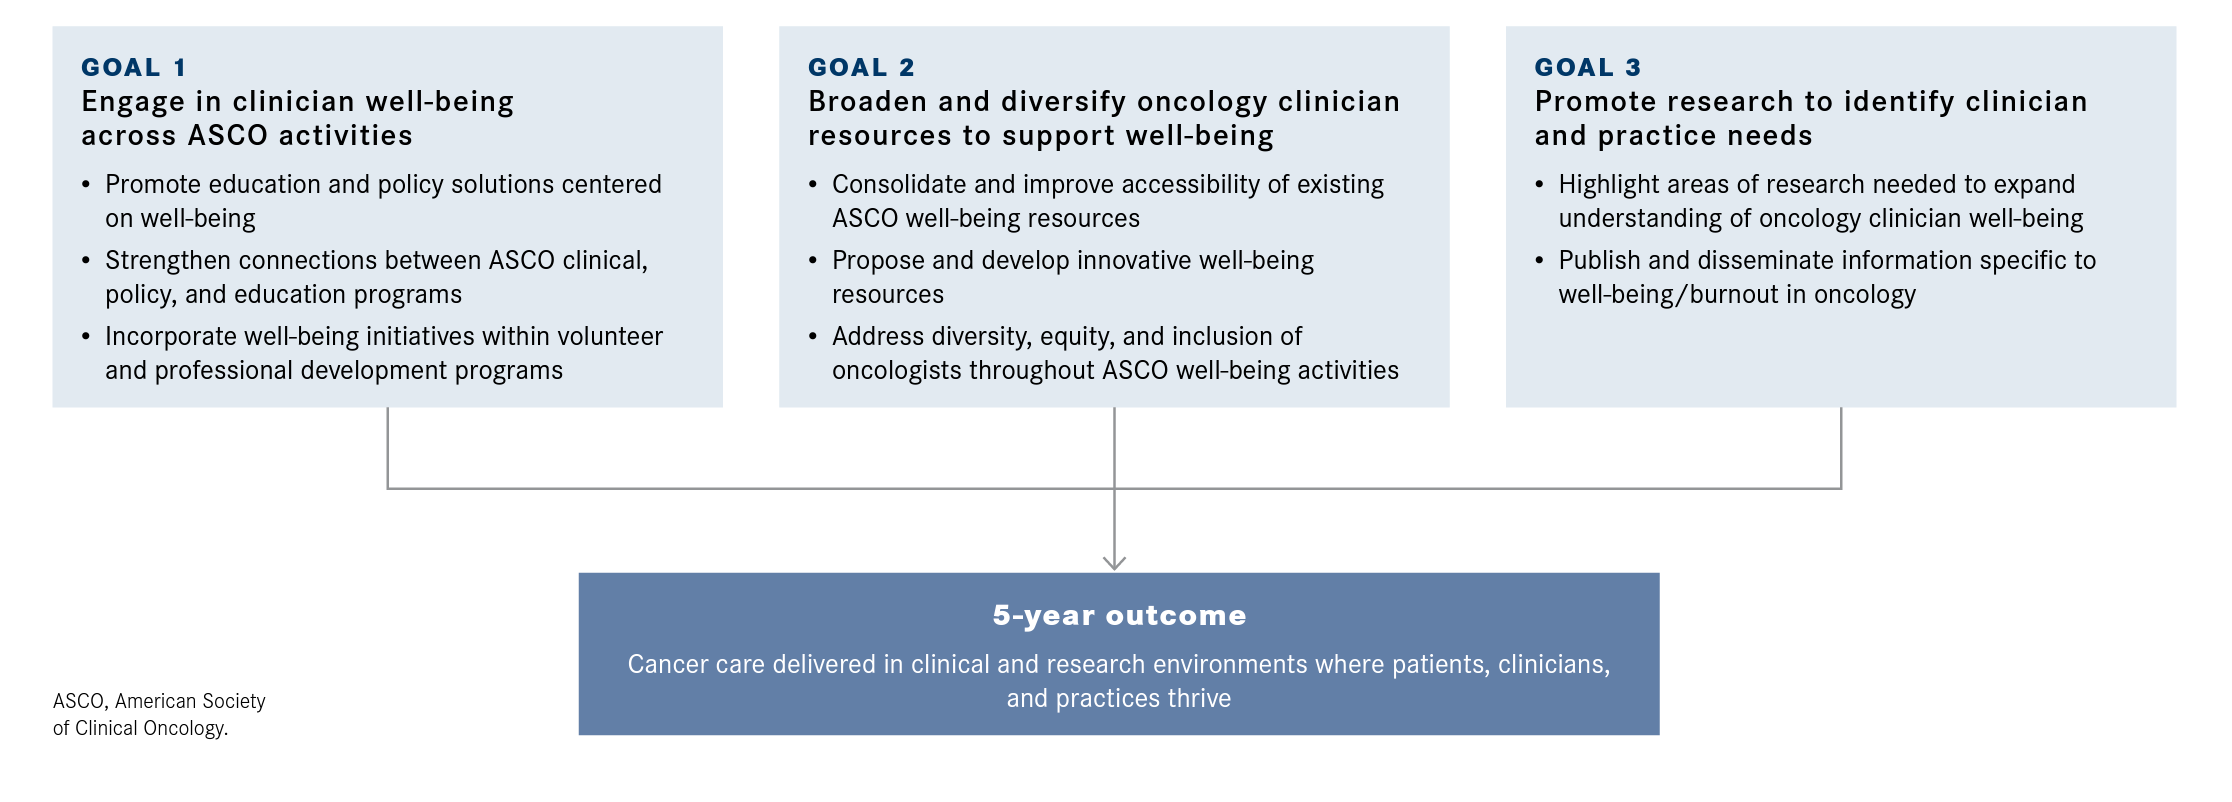 Figure. 5-Year Goals of the ASCO Oncology Clinician Well-Being Task Force14